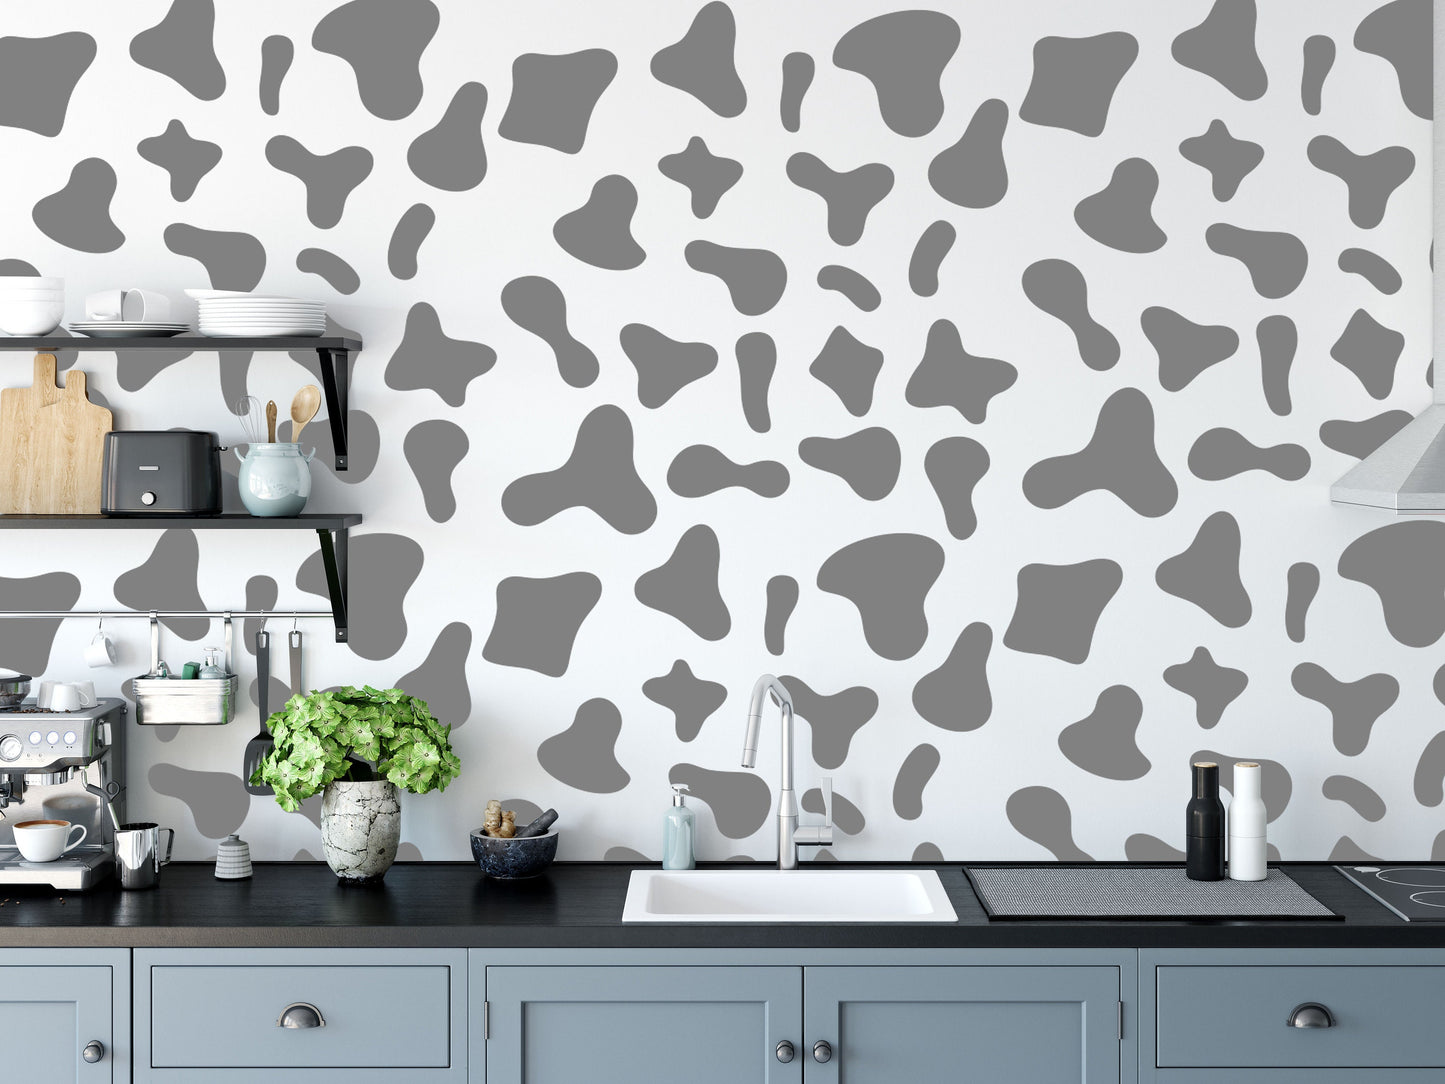 Cow Spot Wall Stickers, Cow Spot Decals, Cow Pattern Stickers, Cow Pattern Decals, Cow Spots Stickers, Cow Print Stickers, Cow Print Decals